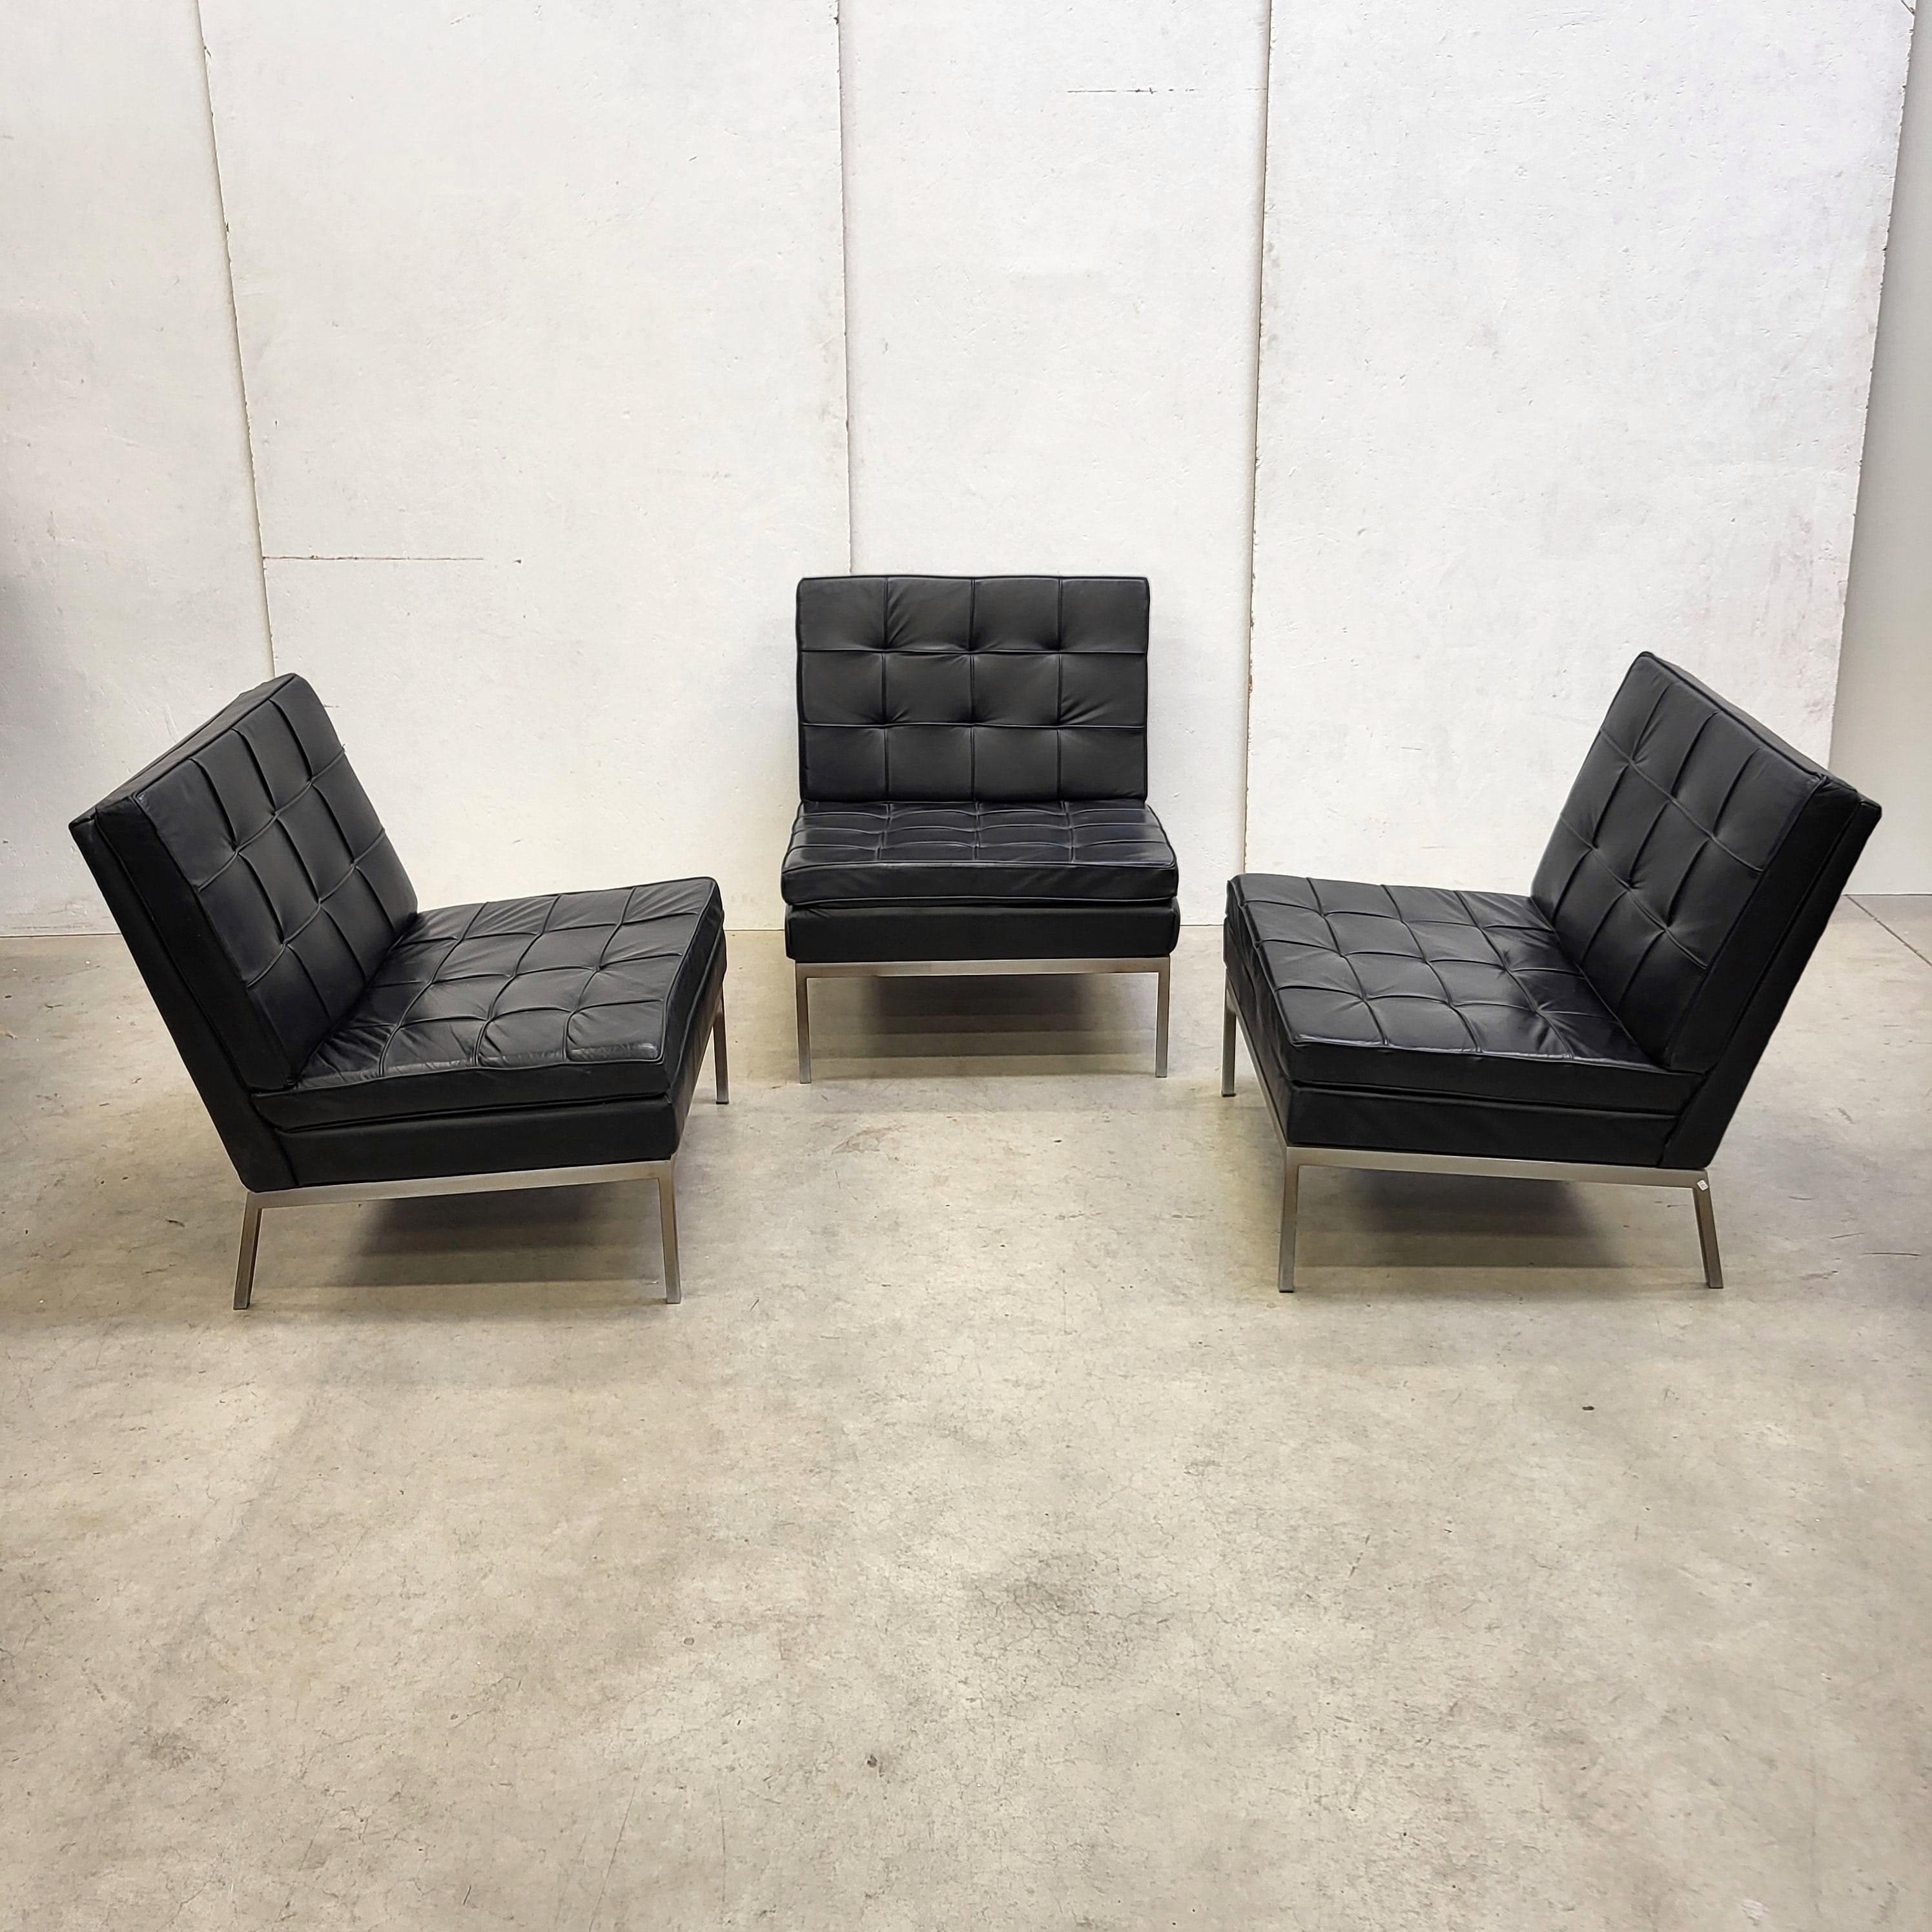 These timeless iconic chairs Model 65 were designed in 1954 by Florence Knoll and produced by Knoll International in the 1960s.

The pieces are upholstered in black leather and are in a very good and clean condition. 

The chairs are full